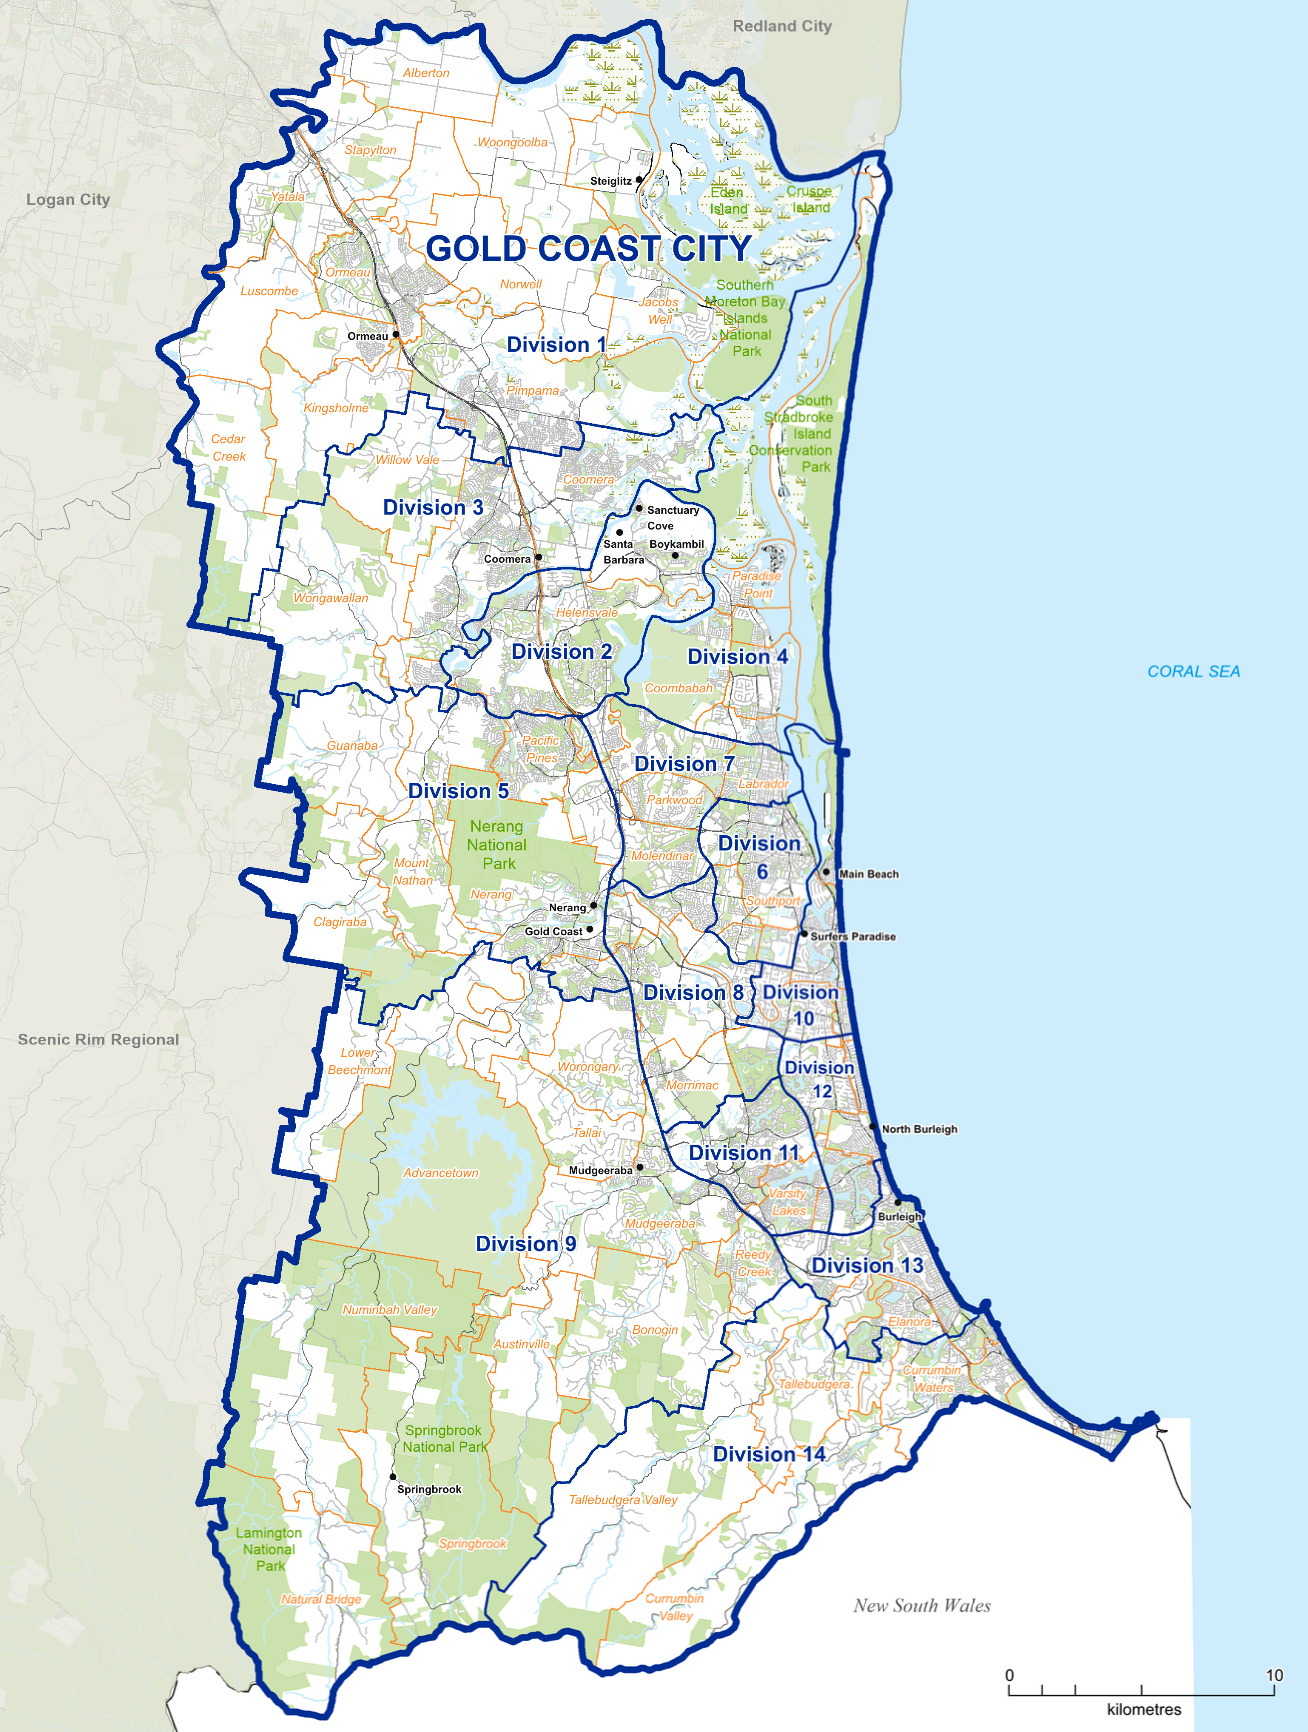 Local Governement electorates on the Gold Coast